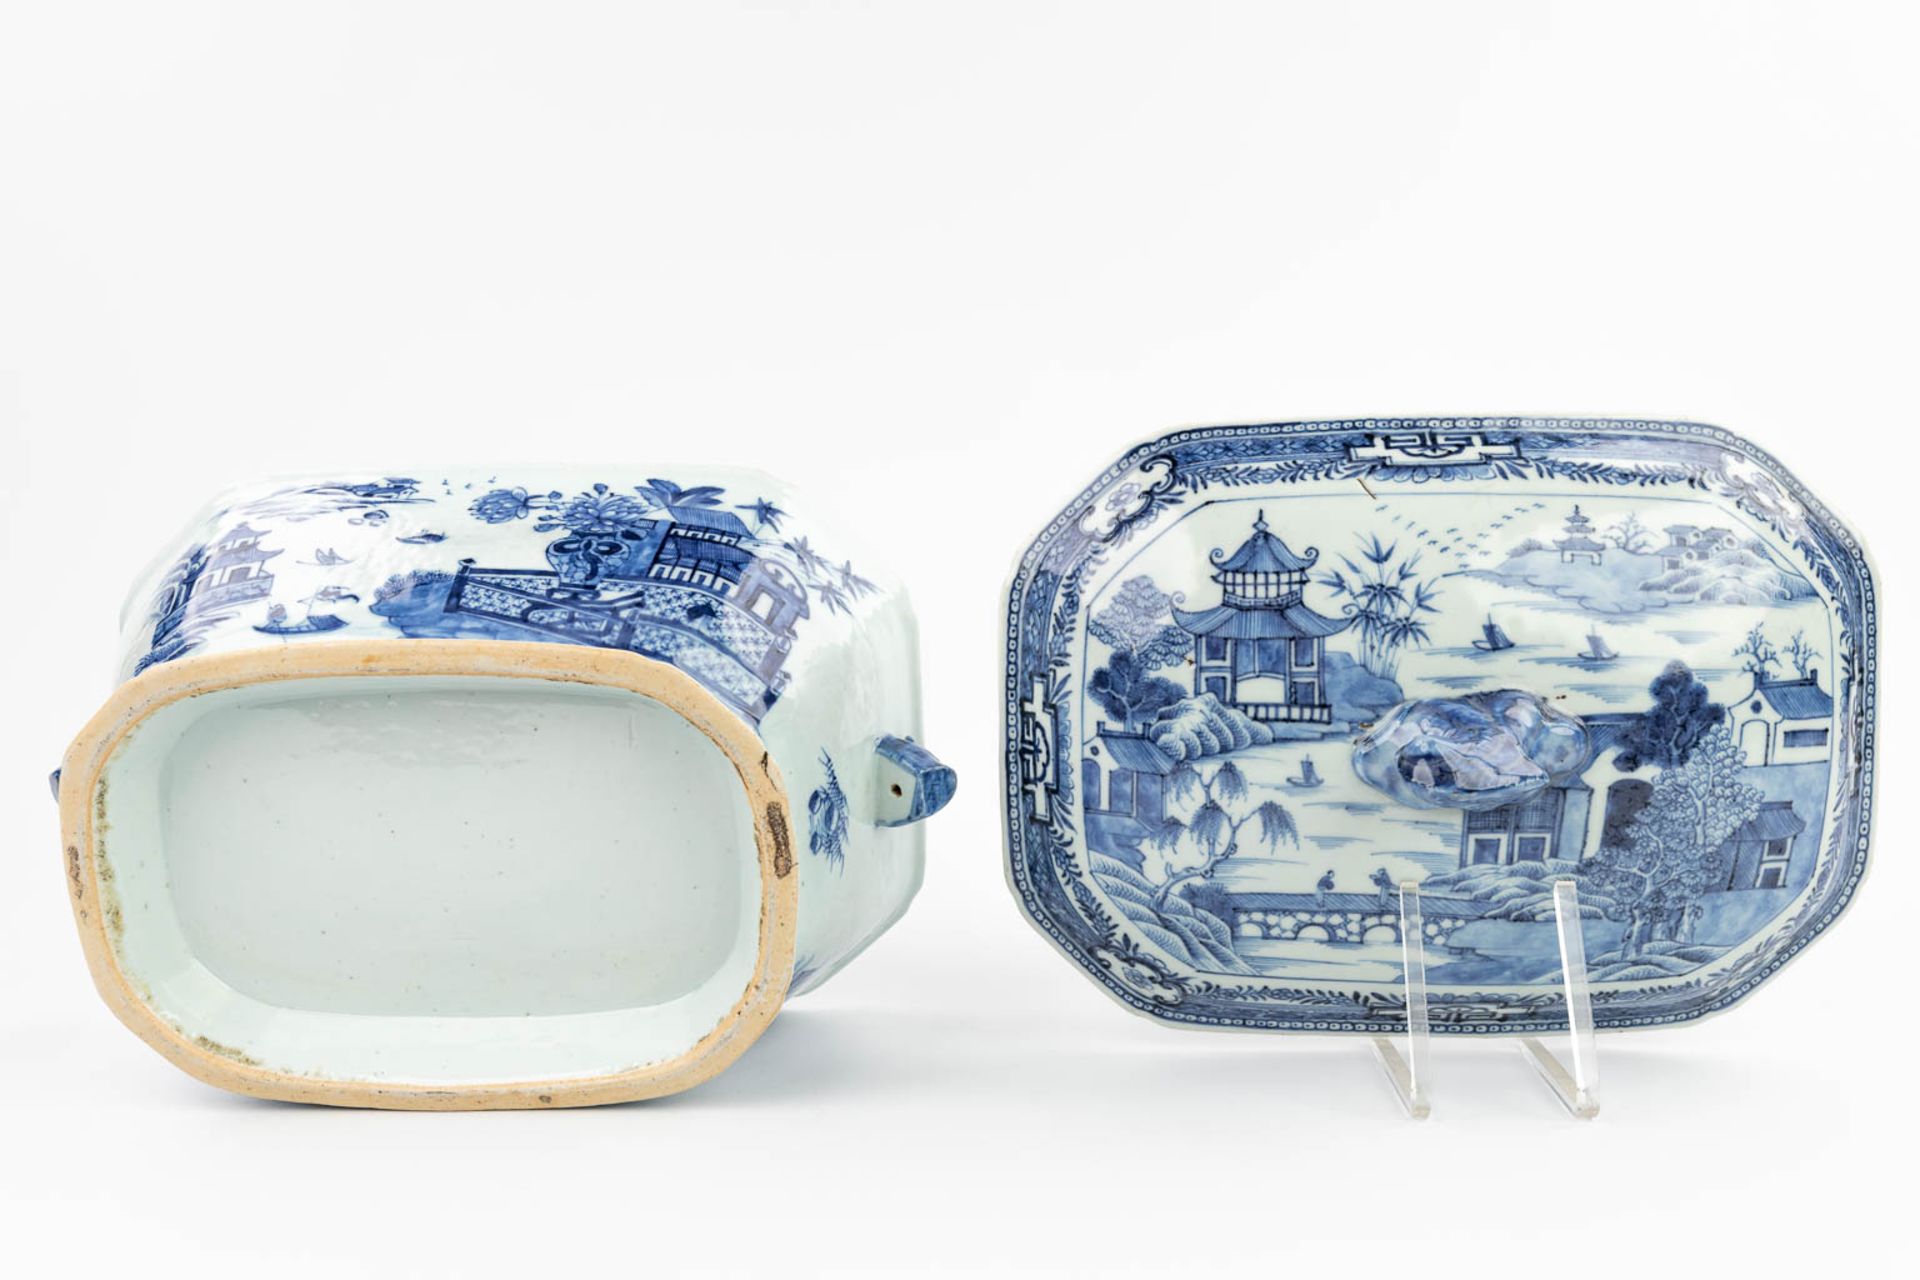 A Chinese soup tureen made of blue-white porcelain. (22 x 31 x 22 cm) - Image 9 of 15